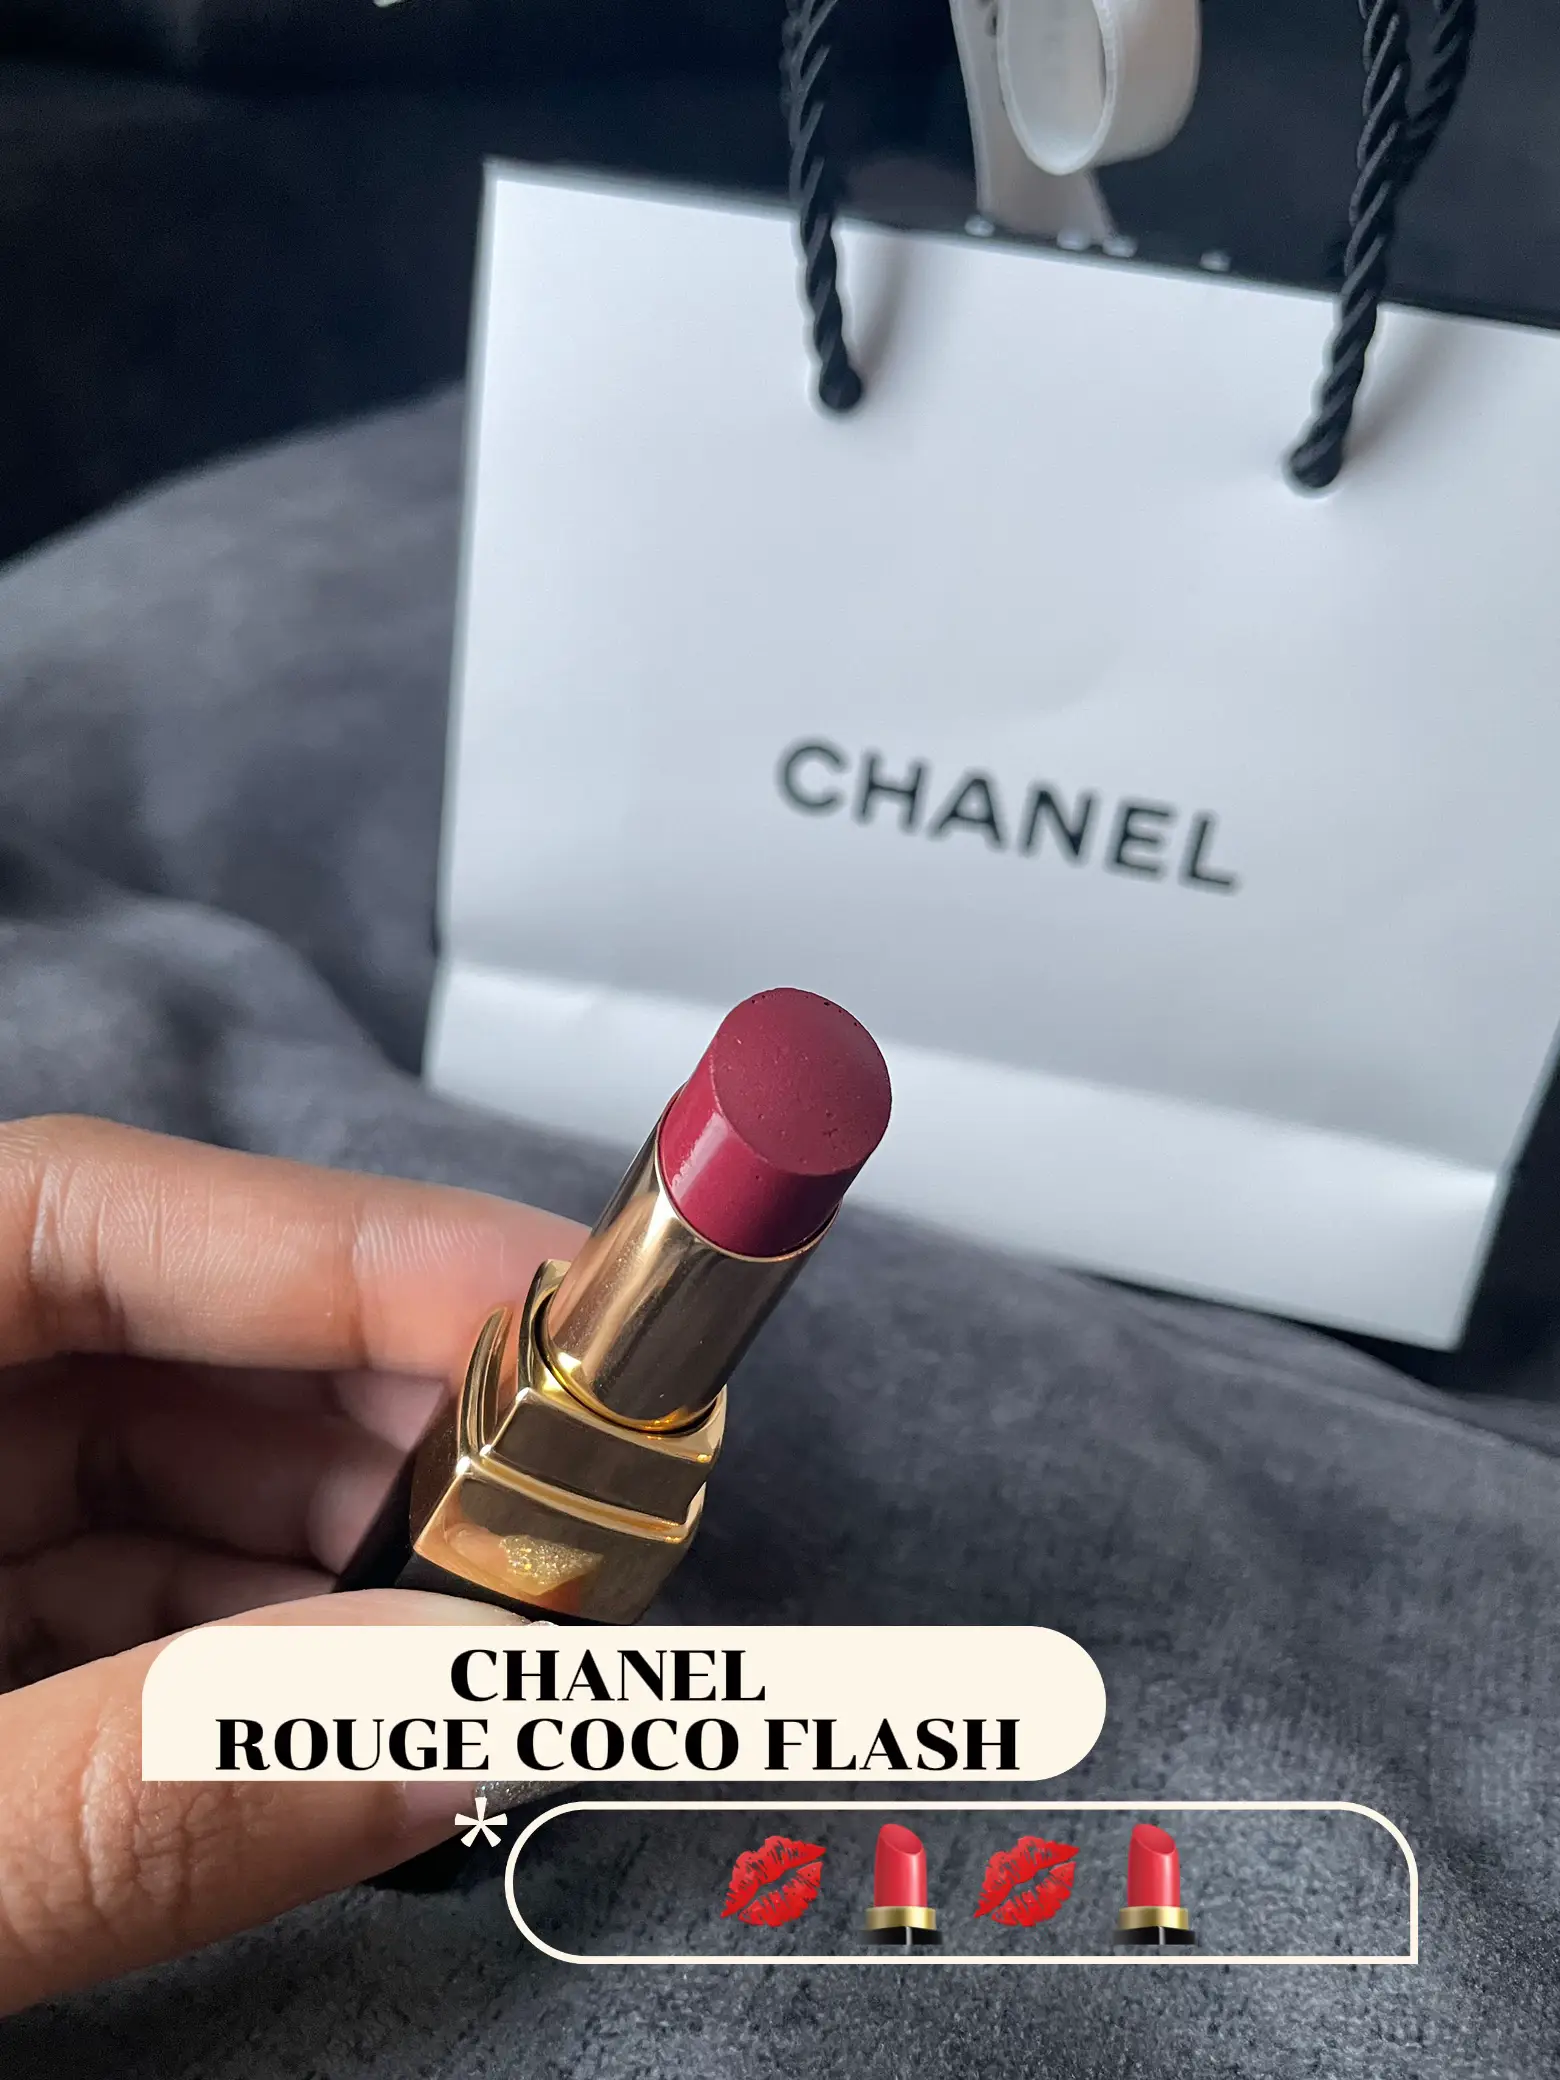 CHANEL ROUGE COCO FLASH, Gallery posted by こーぴー